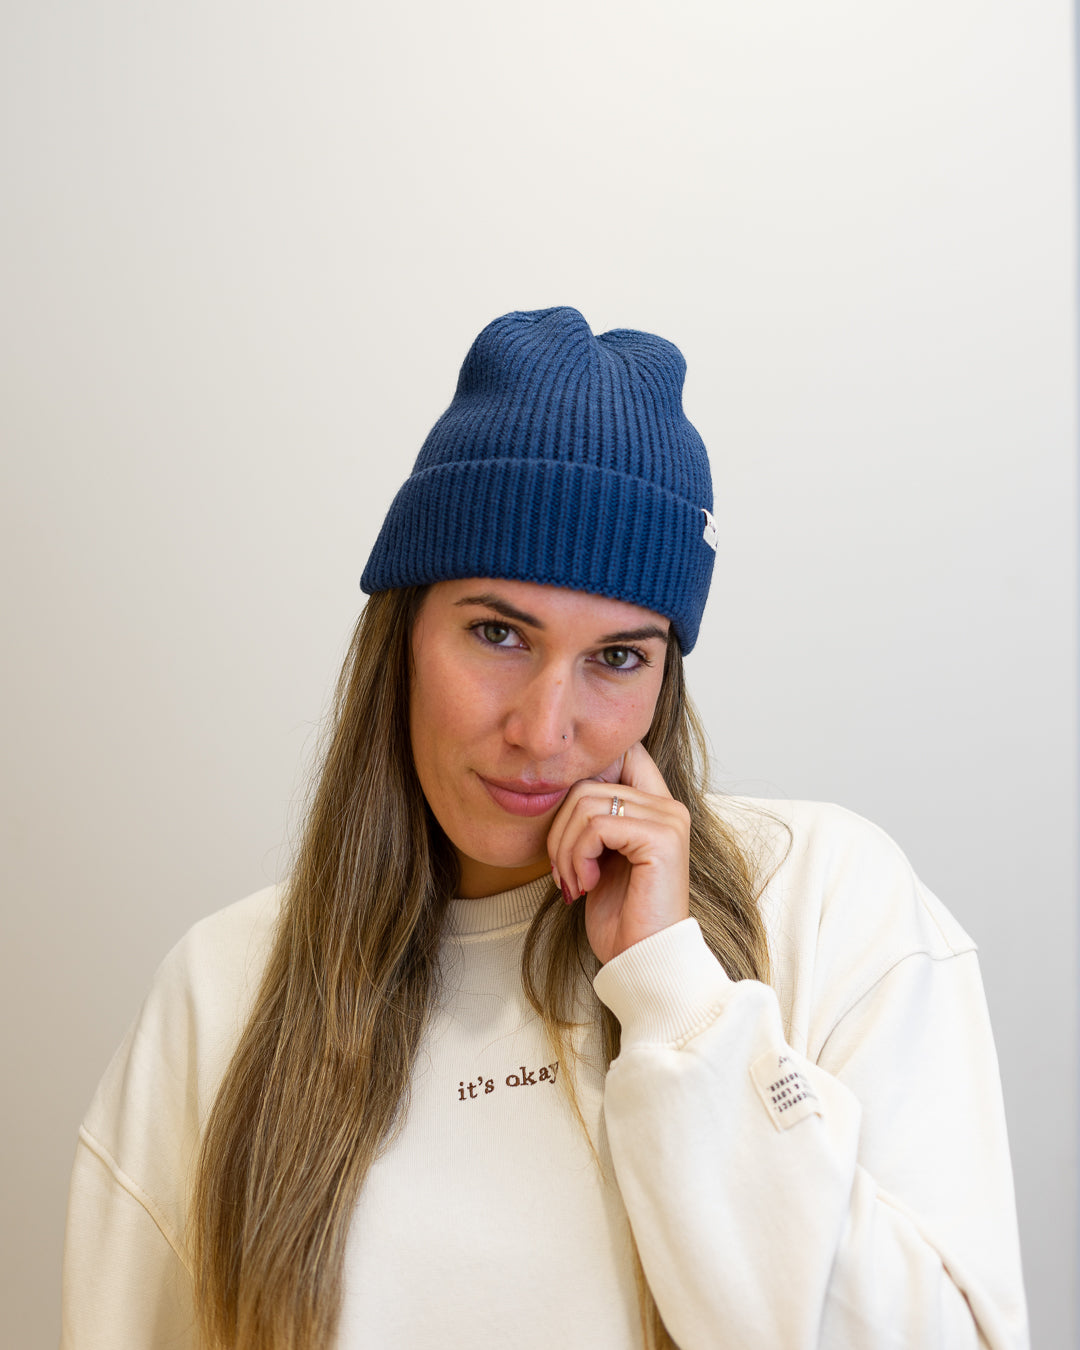 Kind beanie - treat yourself with kindness. Gender neutral, multiple colors, hidden message inside. Join our movement: it's okay to be exactly who you are. Pt. Novos gorros it's okay, várias cores, com uma mensagem interior. Junta-te ao movimento it's okay!